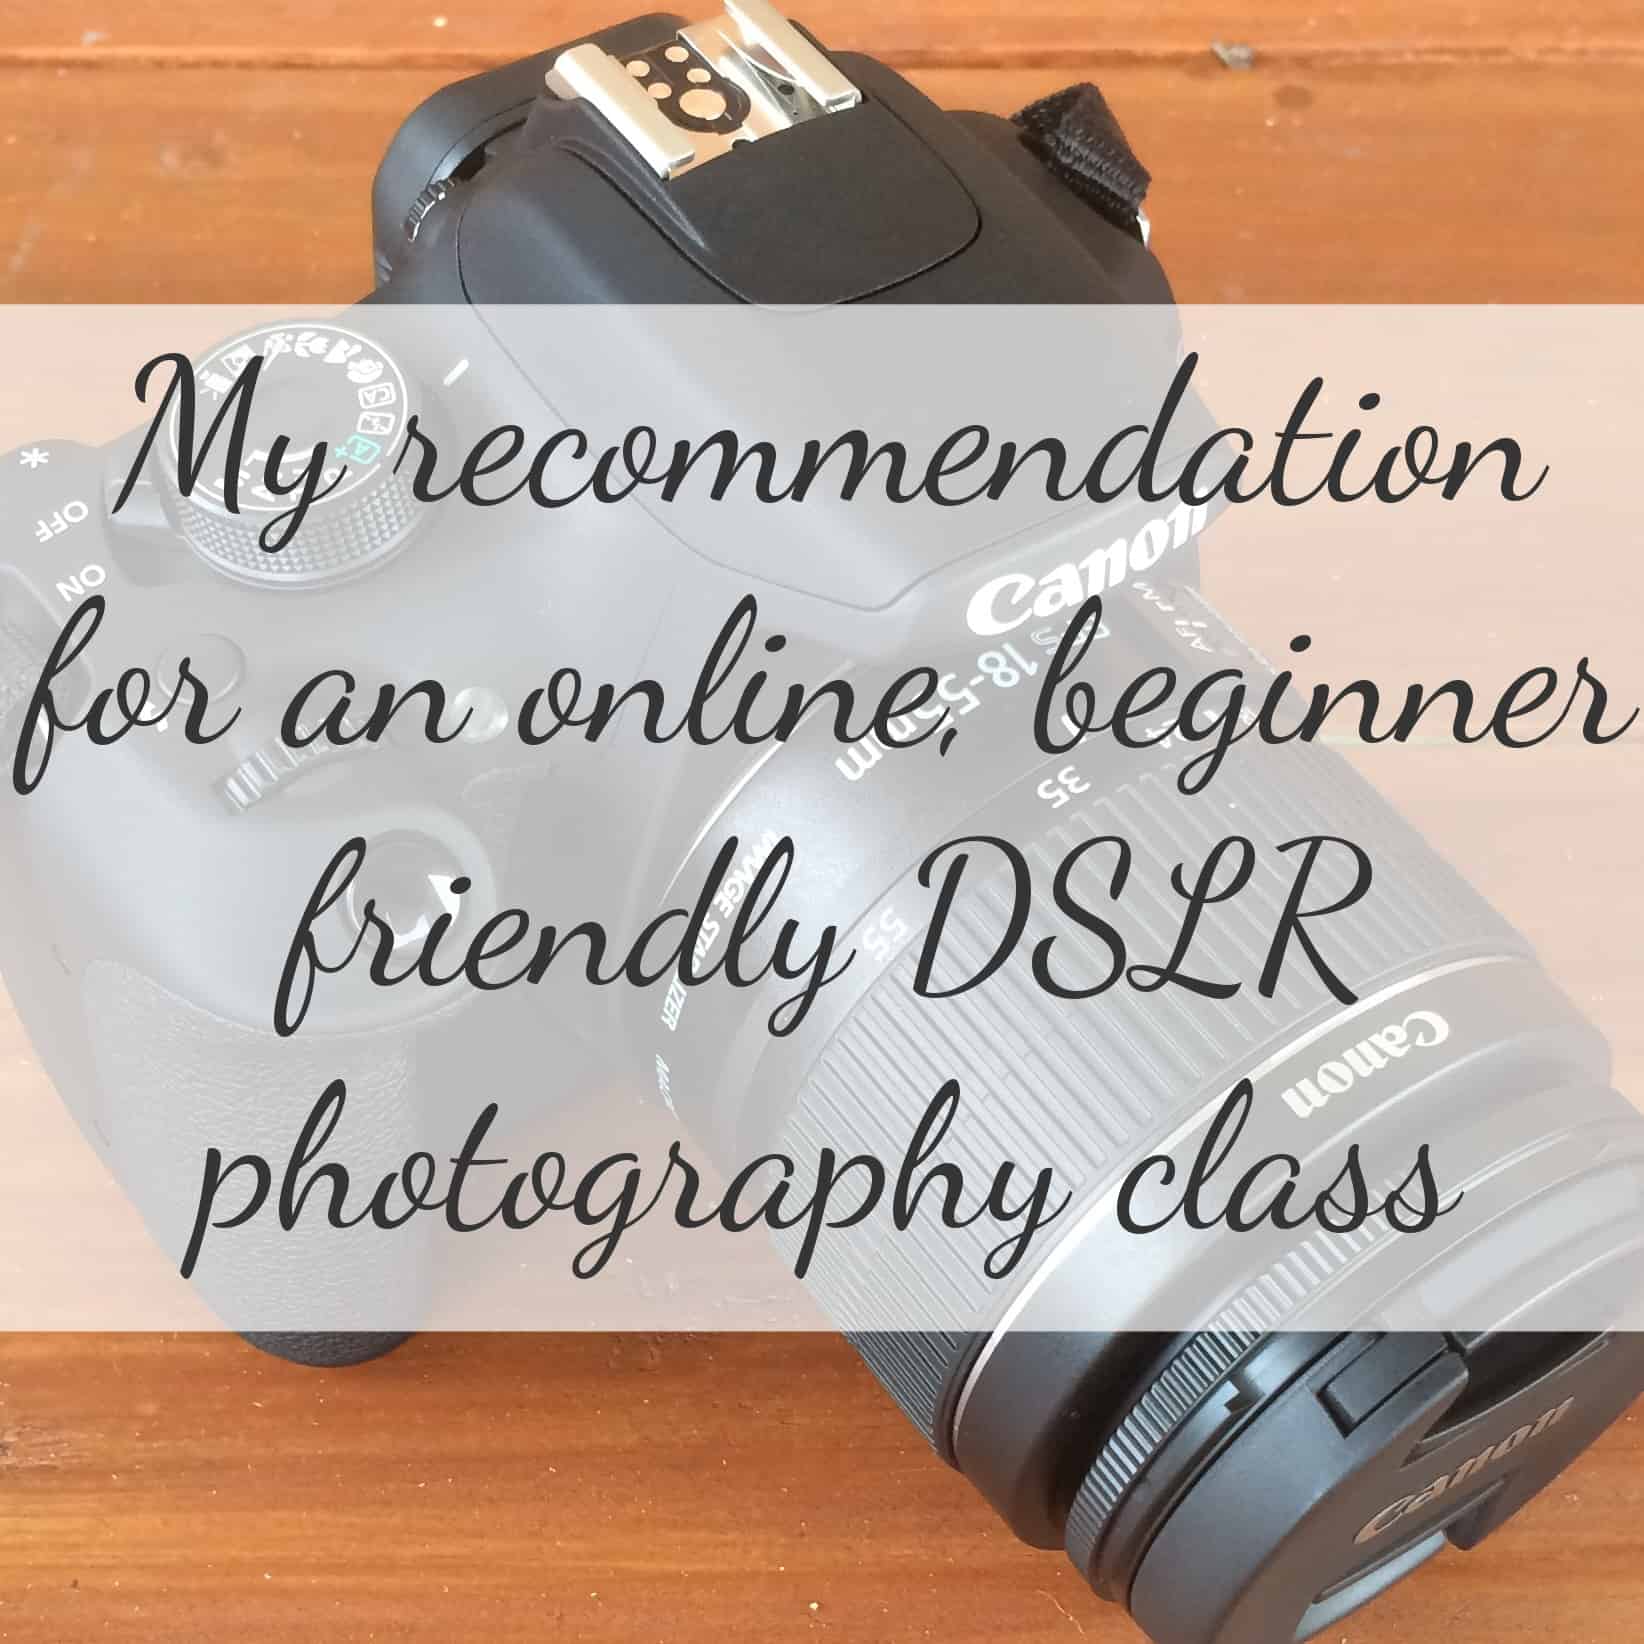 A Recommended Online Photography Class for new DSLR users by cuttingforbusiness.com